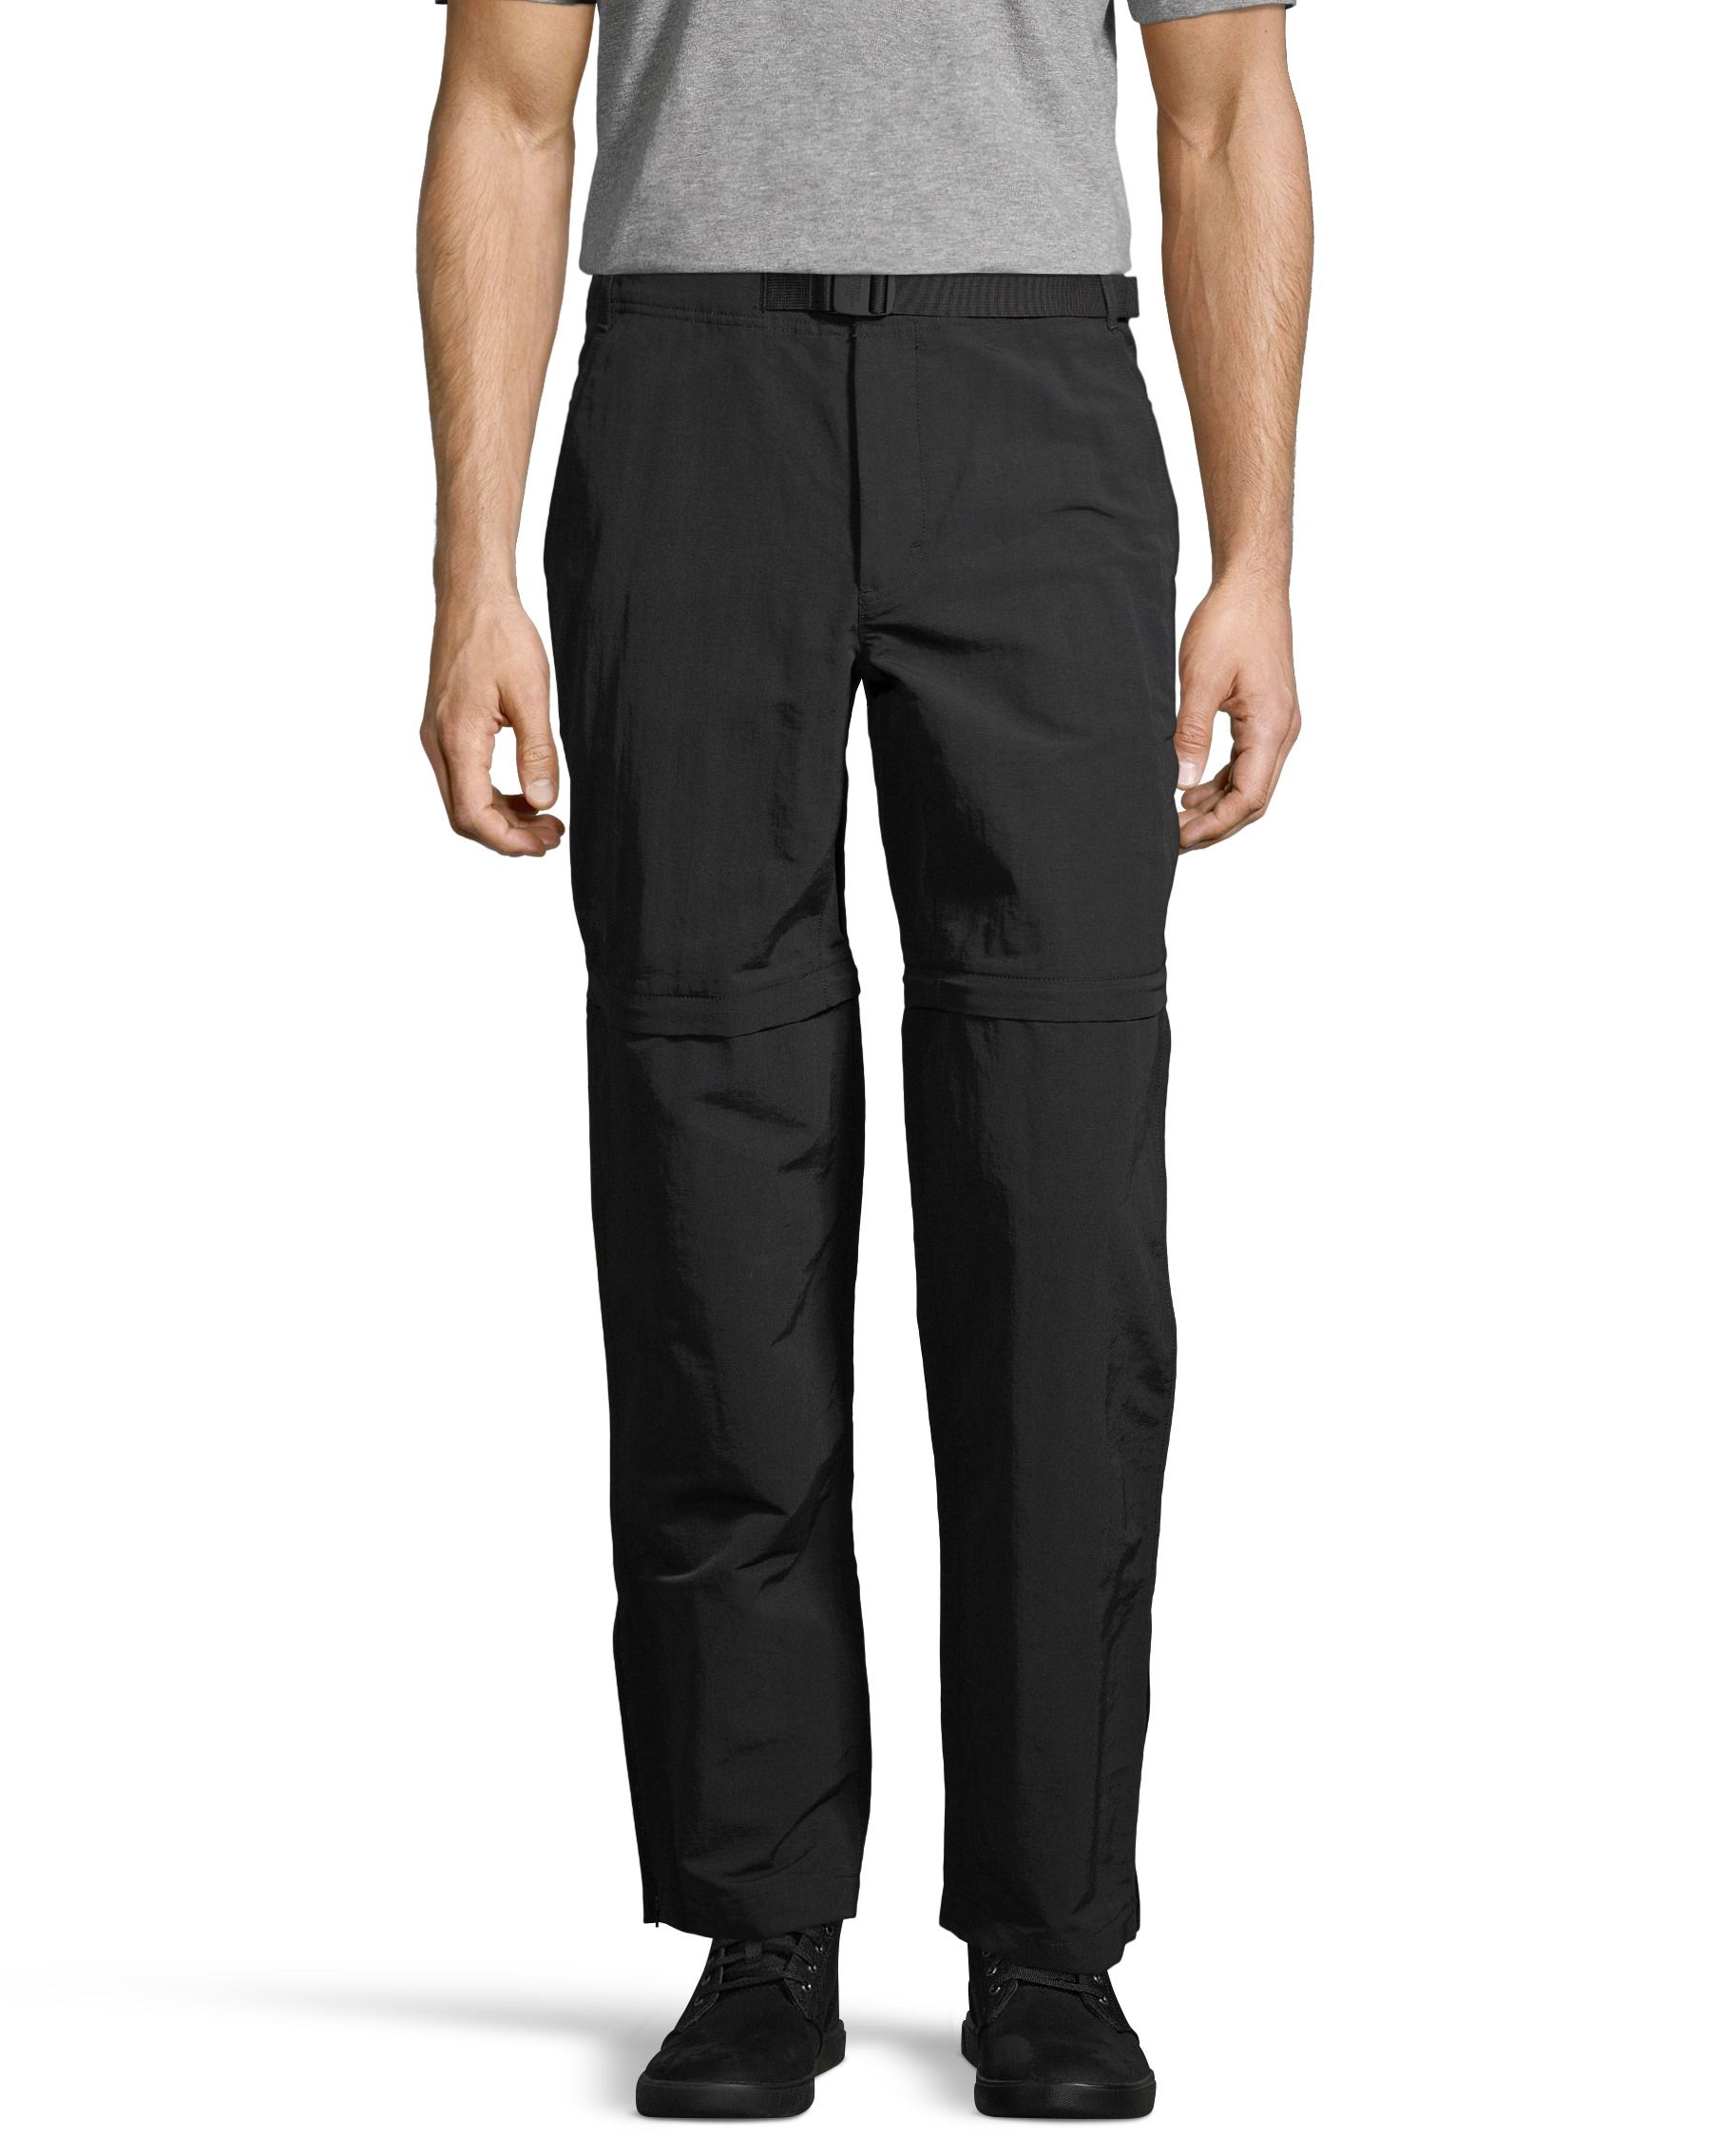 Transition In Motion - Convertible Trousers for Men